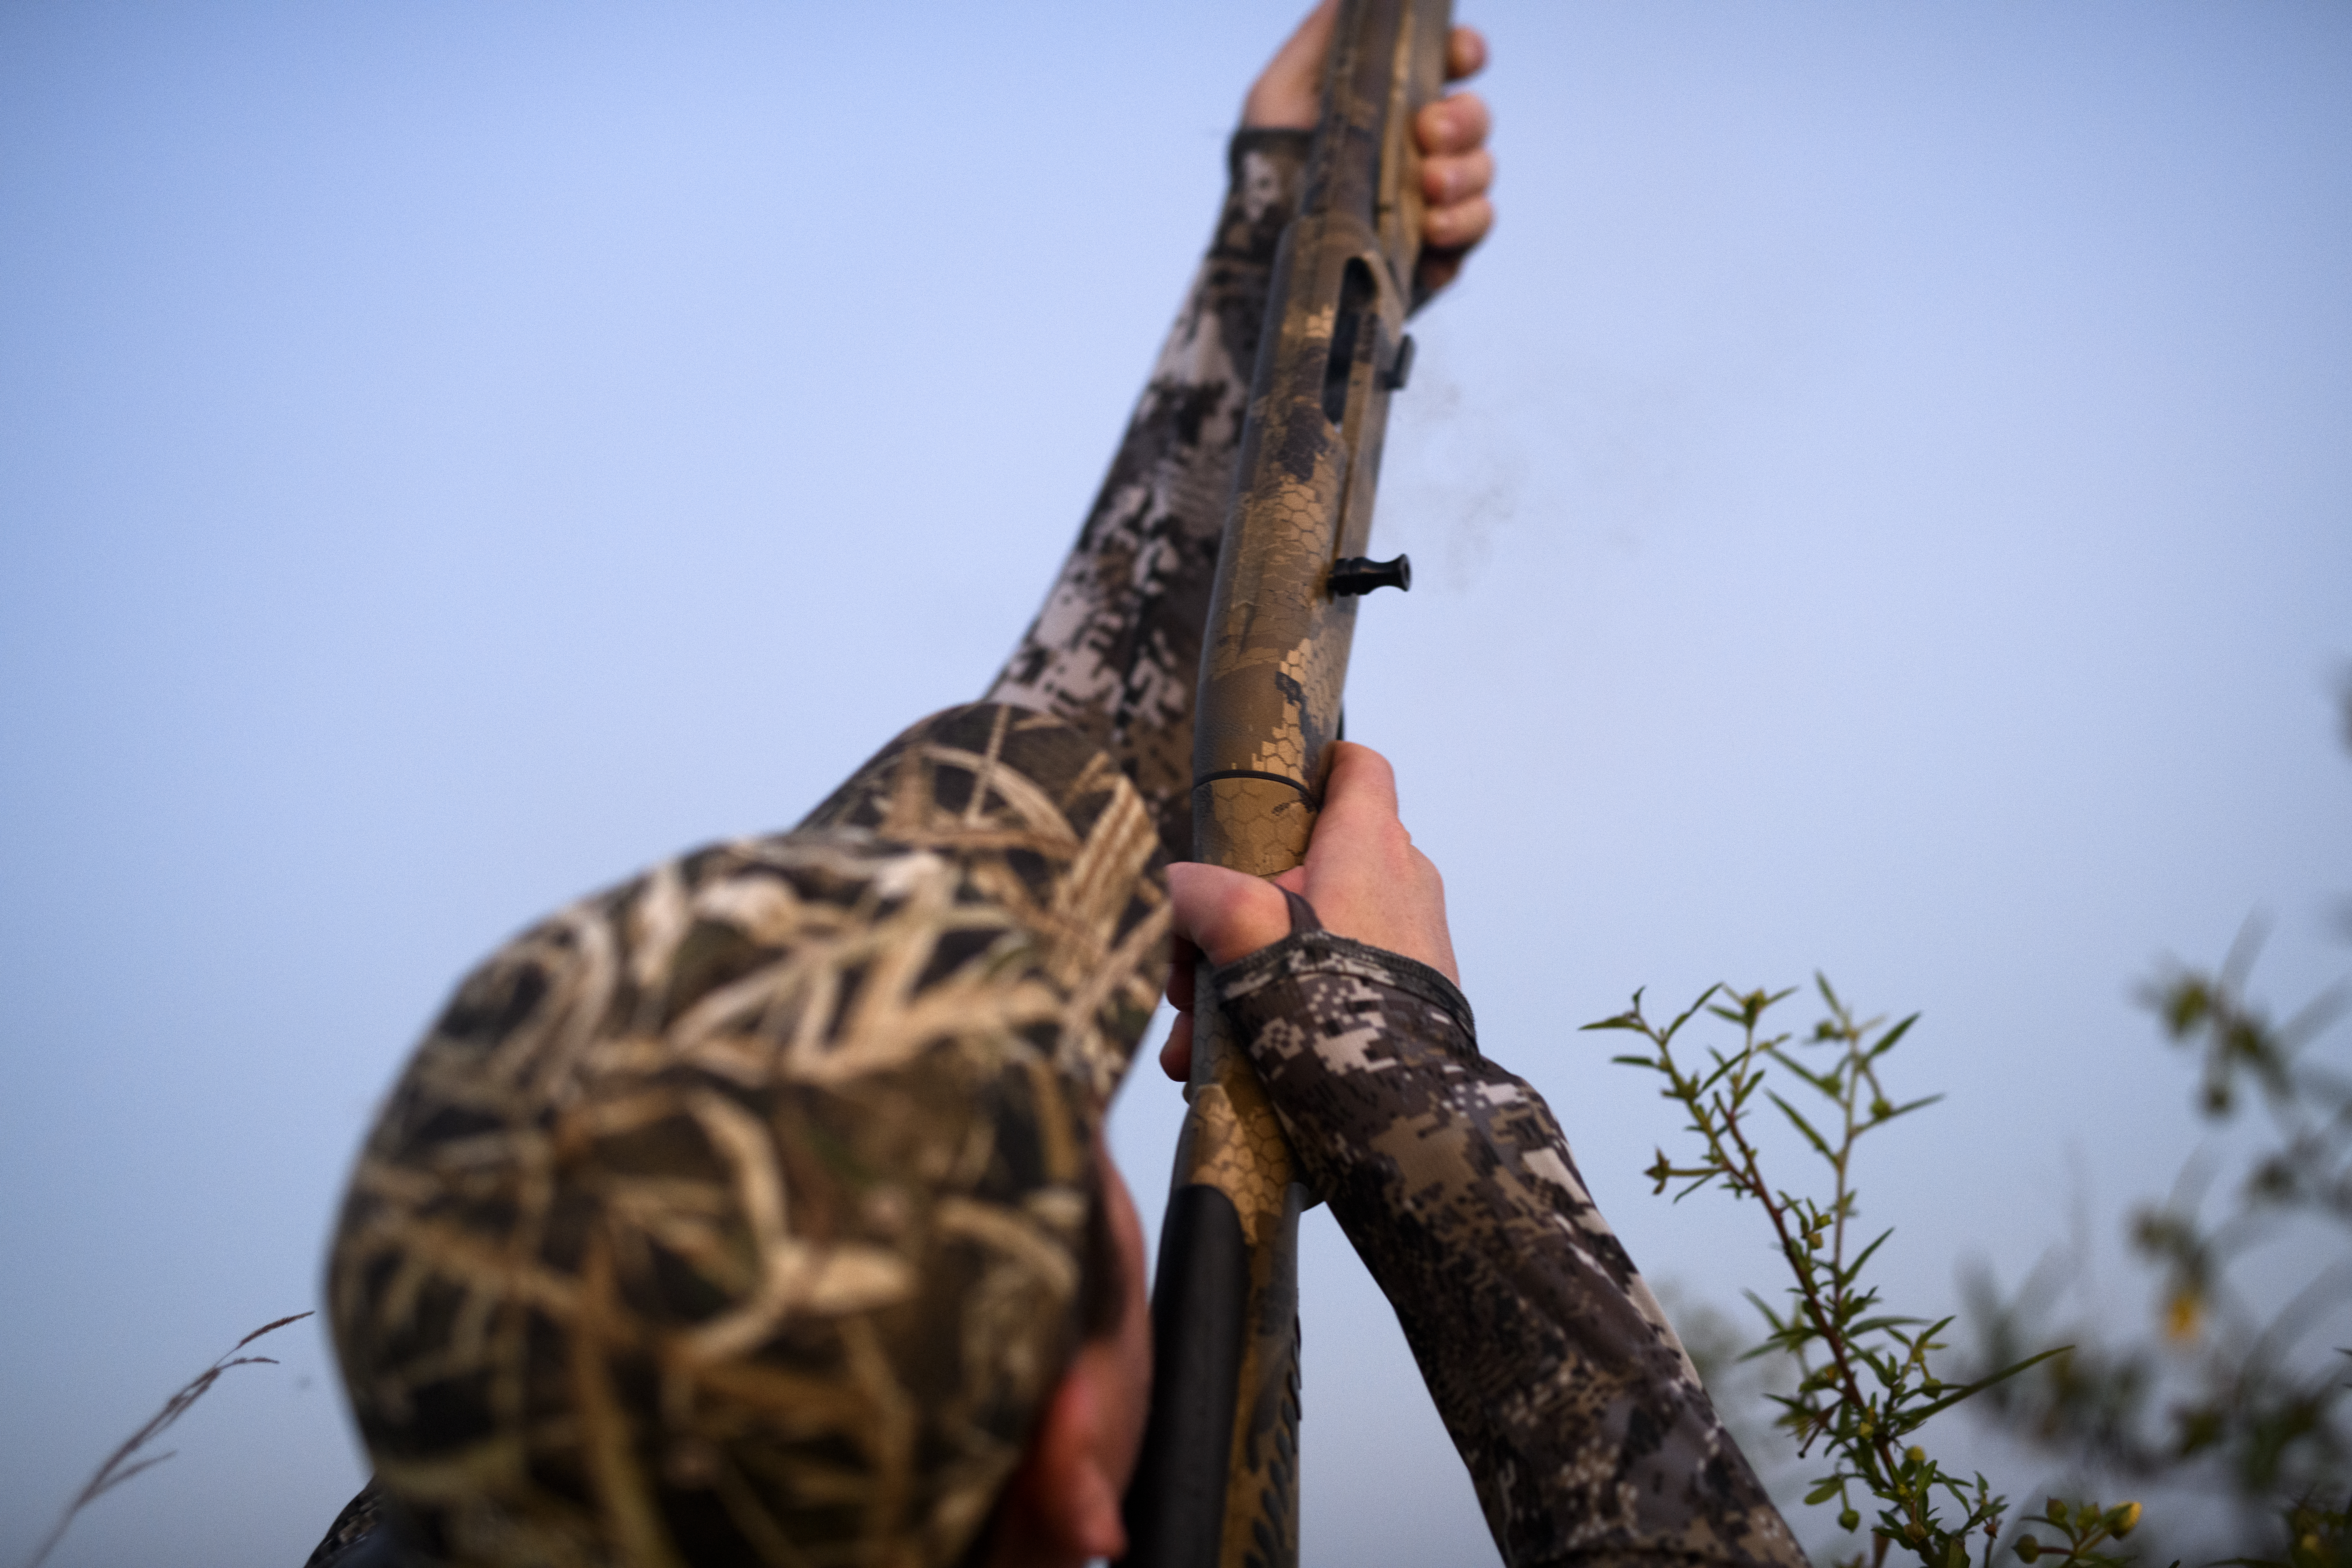 Pass shooting is another option for hunting ducks.